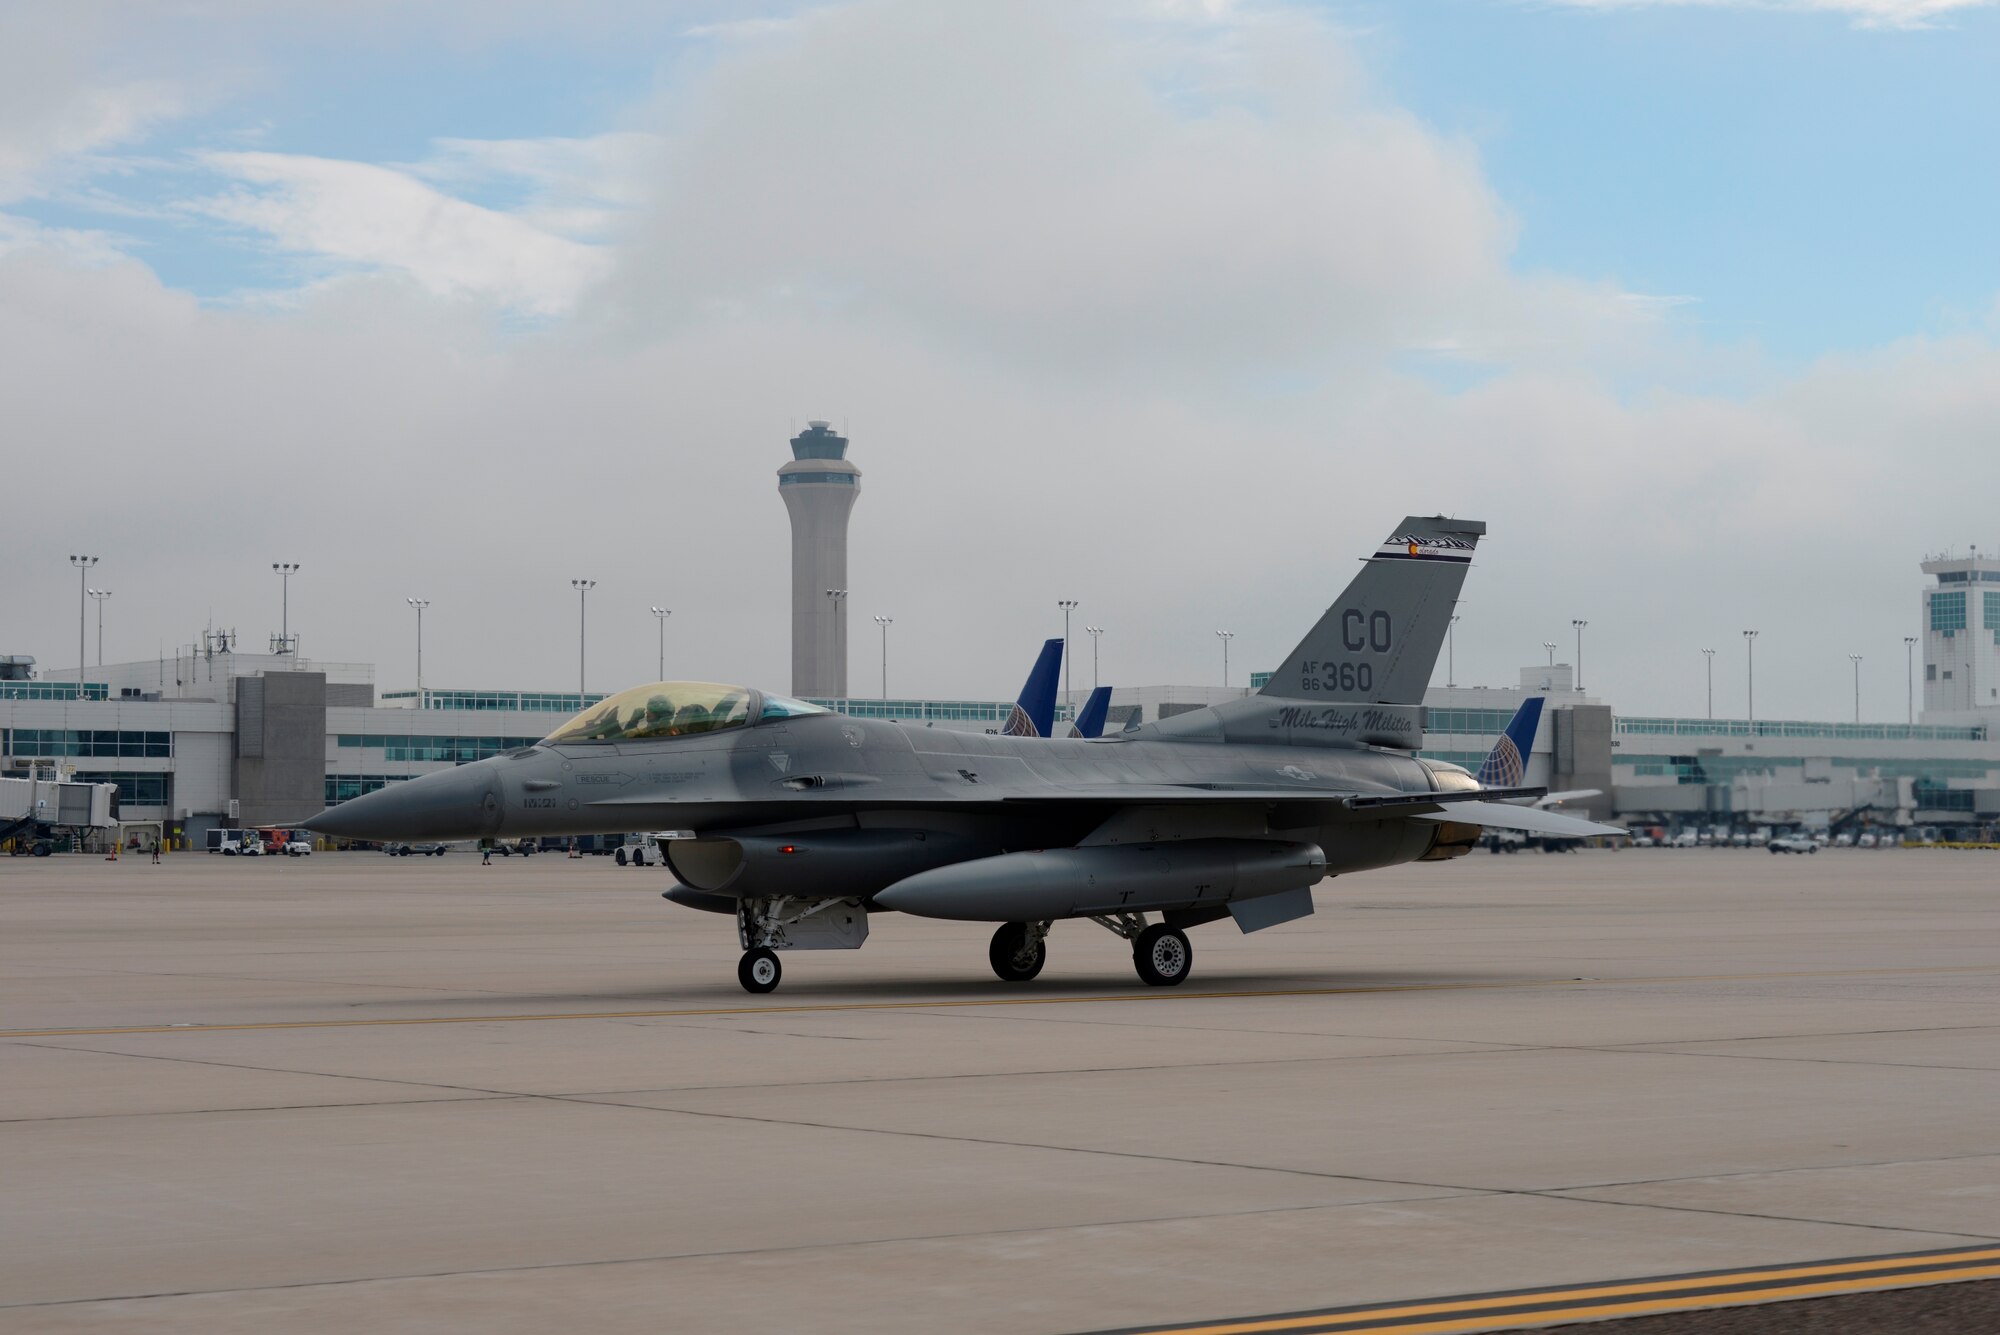 F-16s from the 140th Wing, Colorado Air National Guard begin to return to Buckley Air Force Base July 12, 2014, slightly ahead of schedule, after spending approximately three months at Denver International Airport while the base runway was being reconstructed. Despite relocating their entire flying operations, the wing managed to provide uninterrupted support to their Aerospace Control Alert mission 24/7 throughout the transition to DIA and back to Buckley AFB. (Air National Guard Photo by Tech. Sgt. Wolfram Stumpf) 